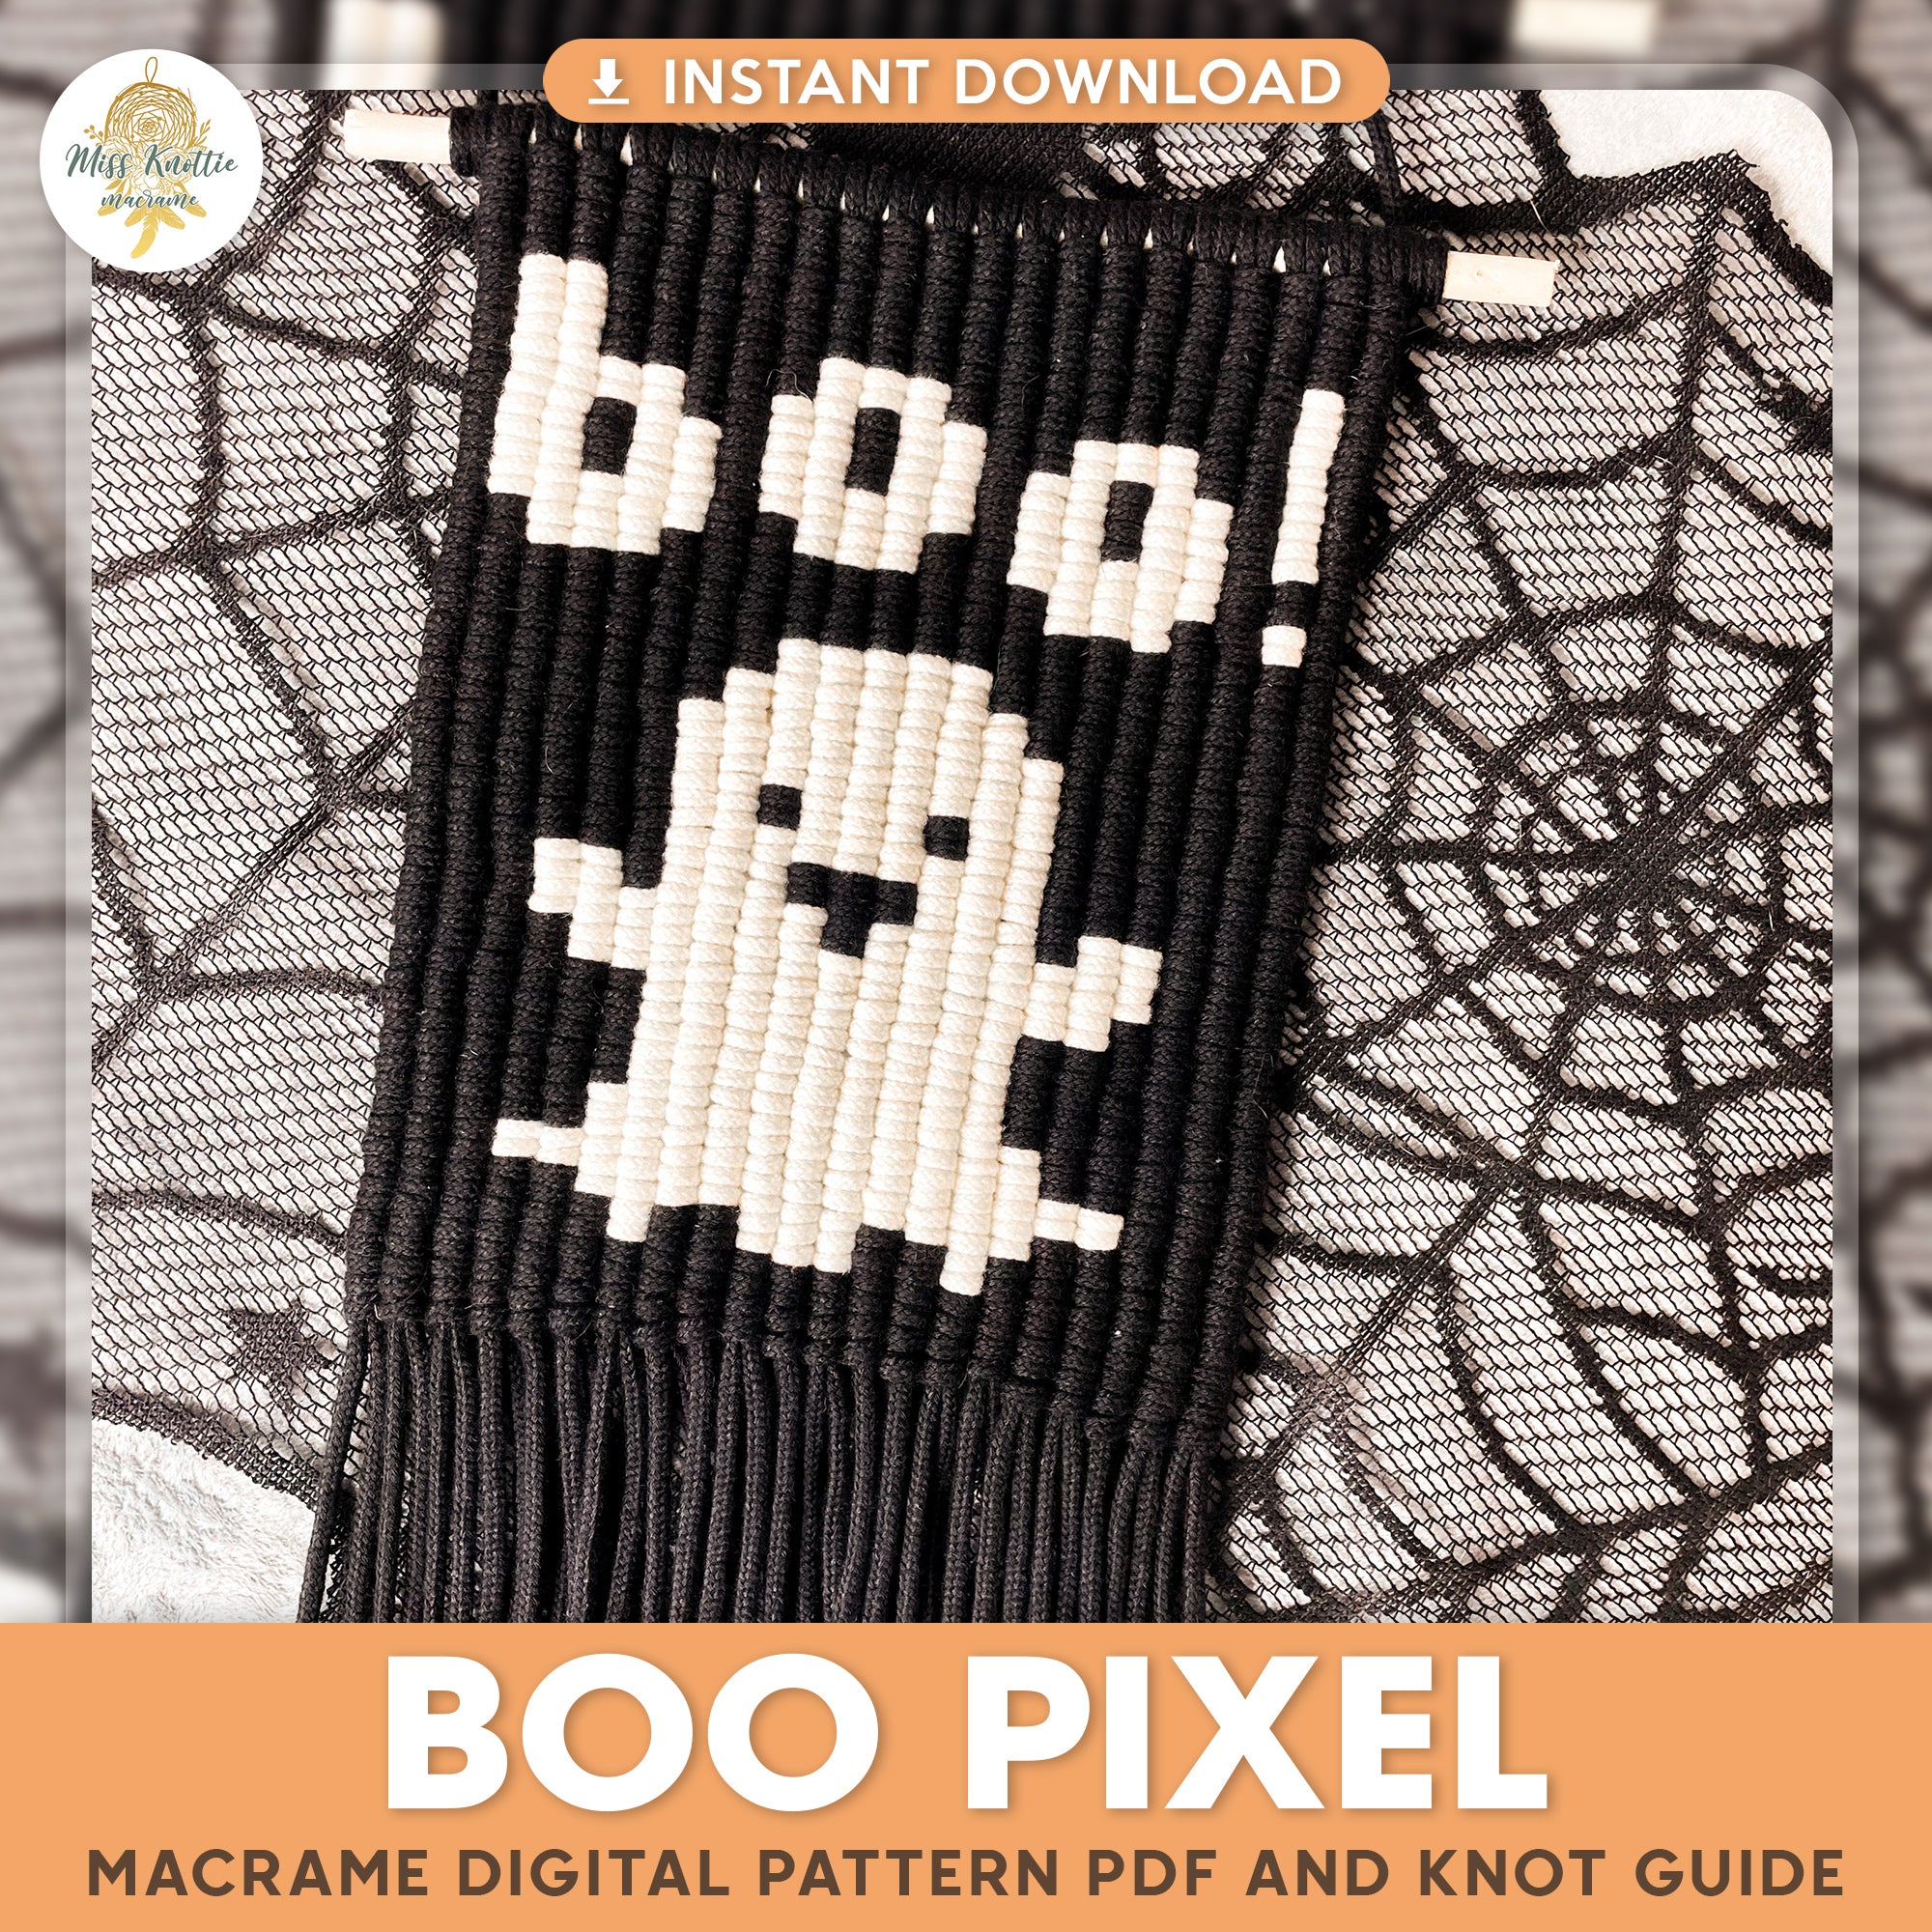 Halloween Boo Pixel Pattern - Digital PDF and Knot Guide